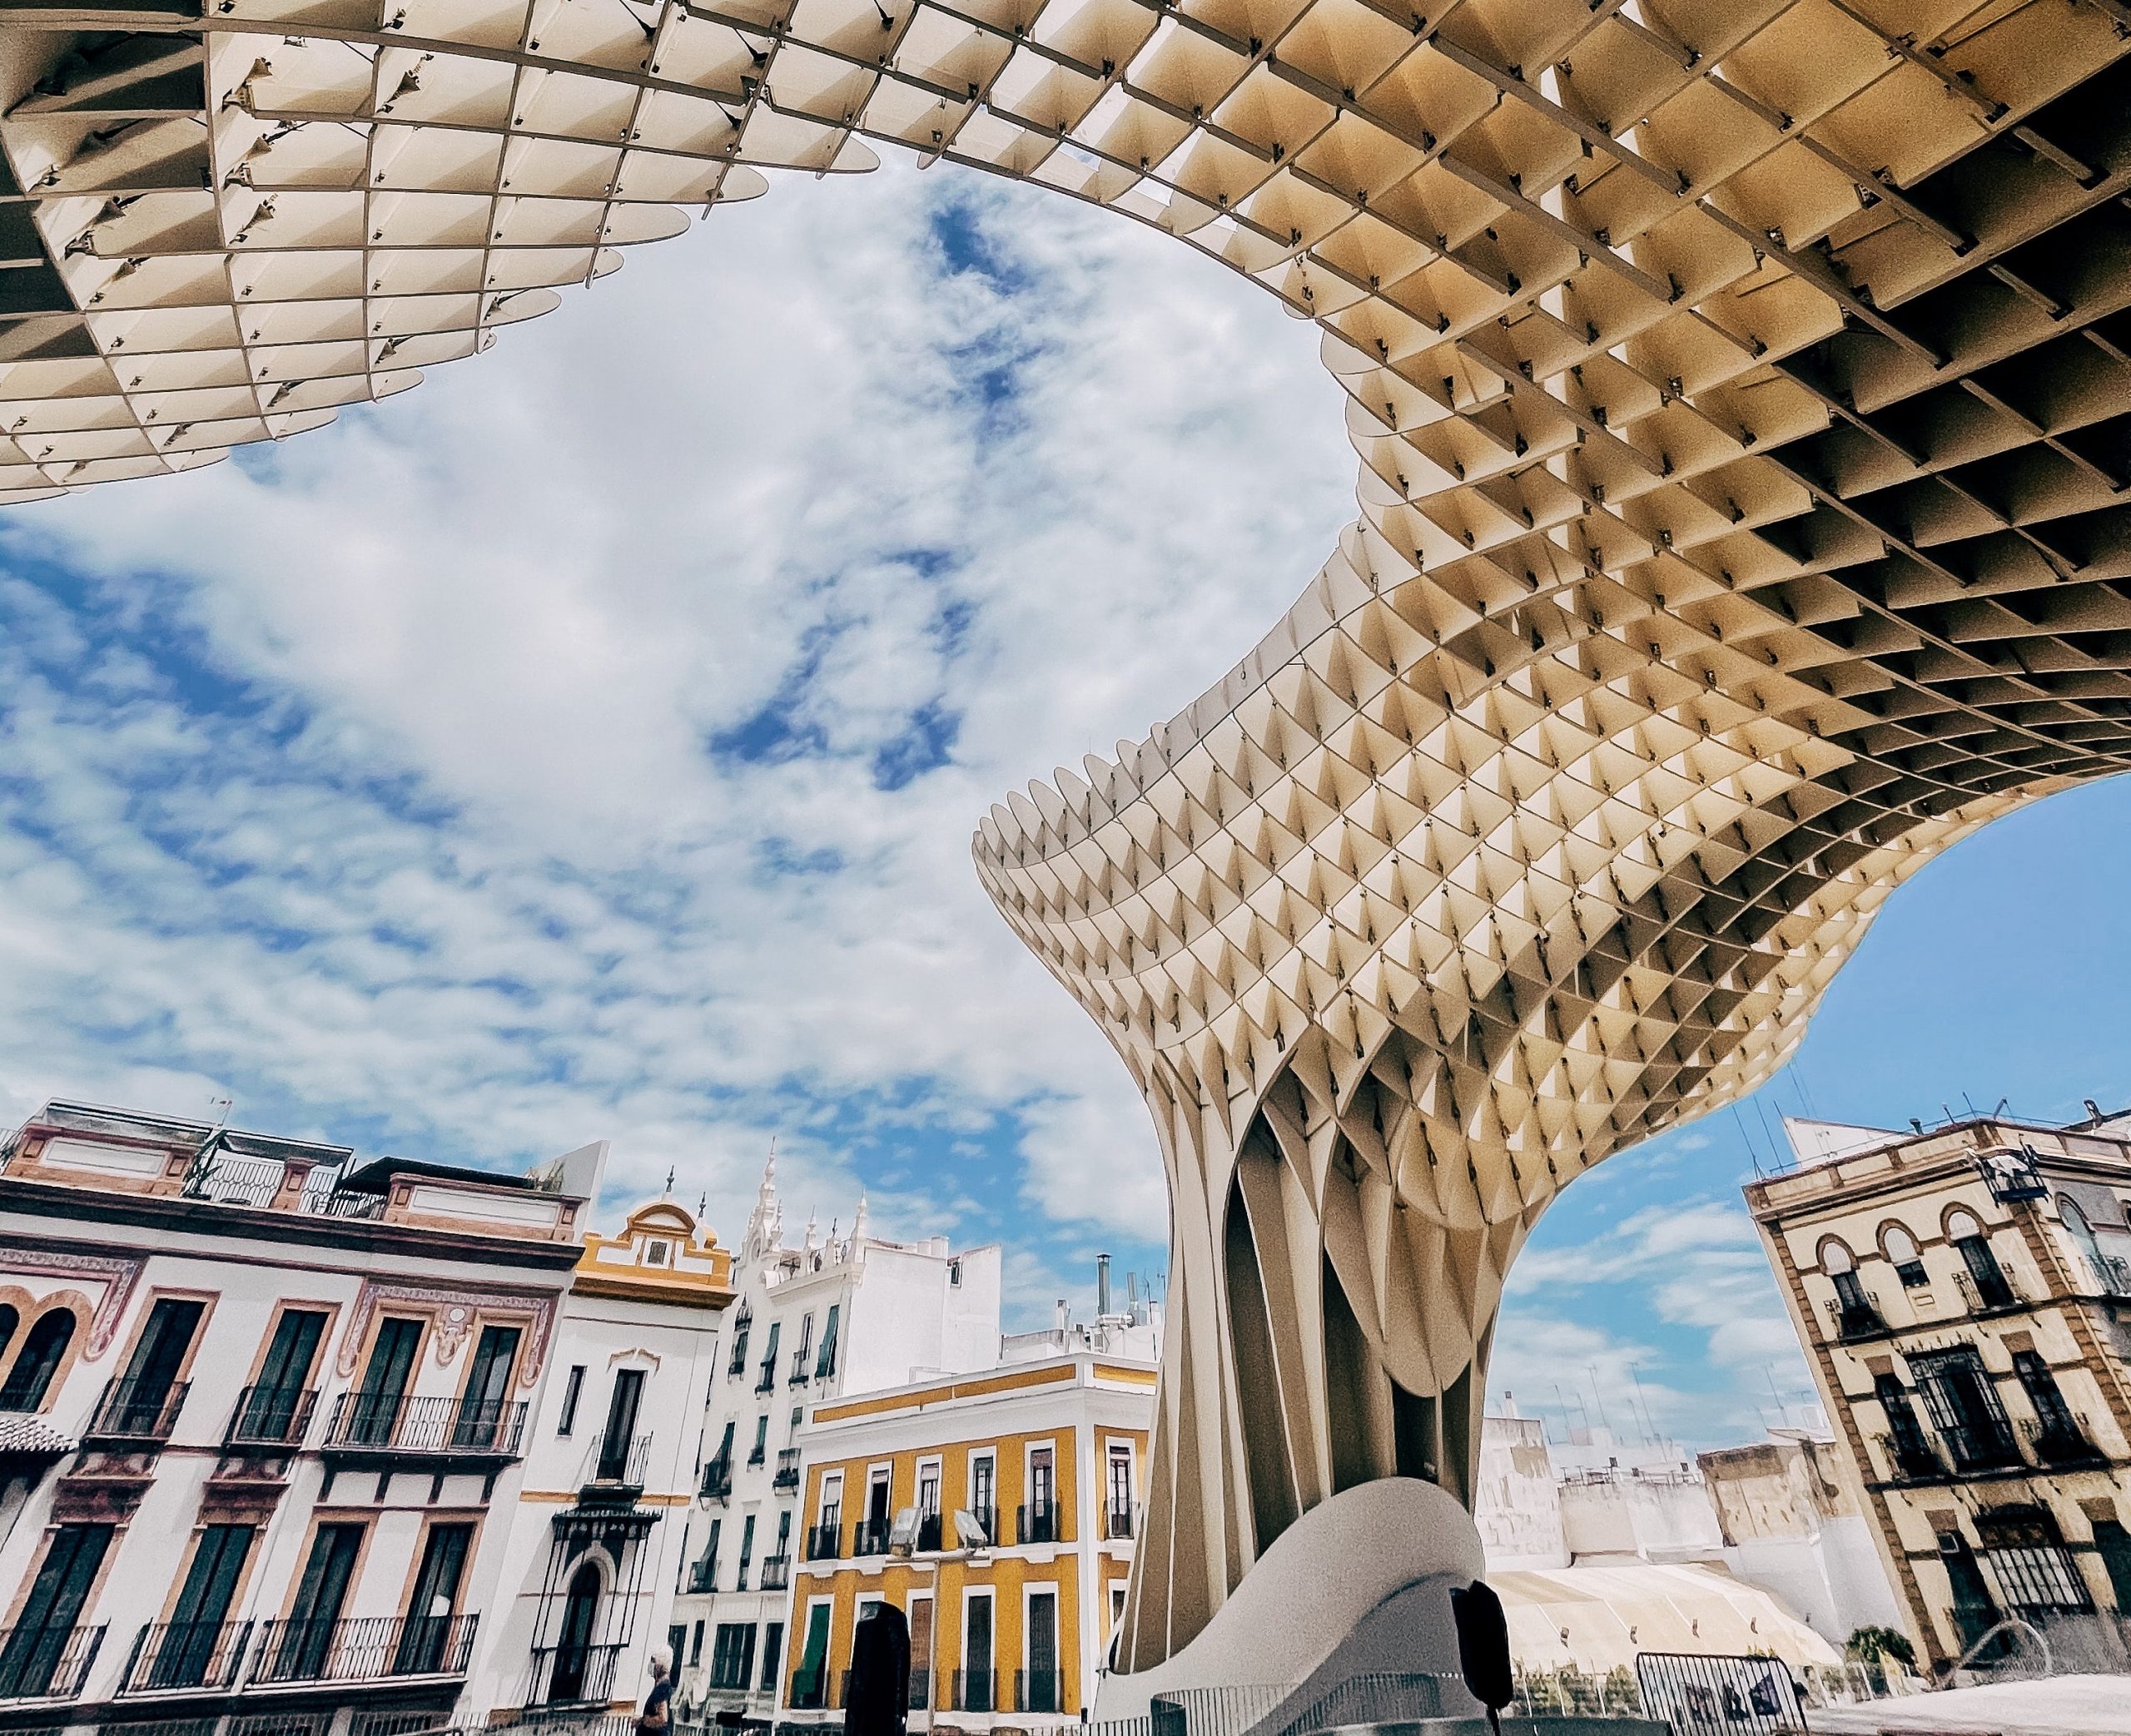 Old Meets New In The Spanish City Of Seville